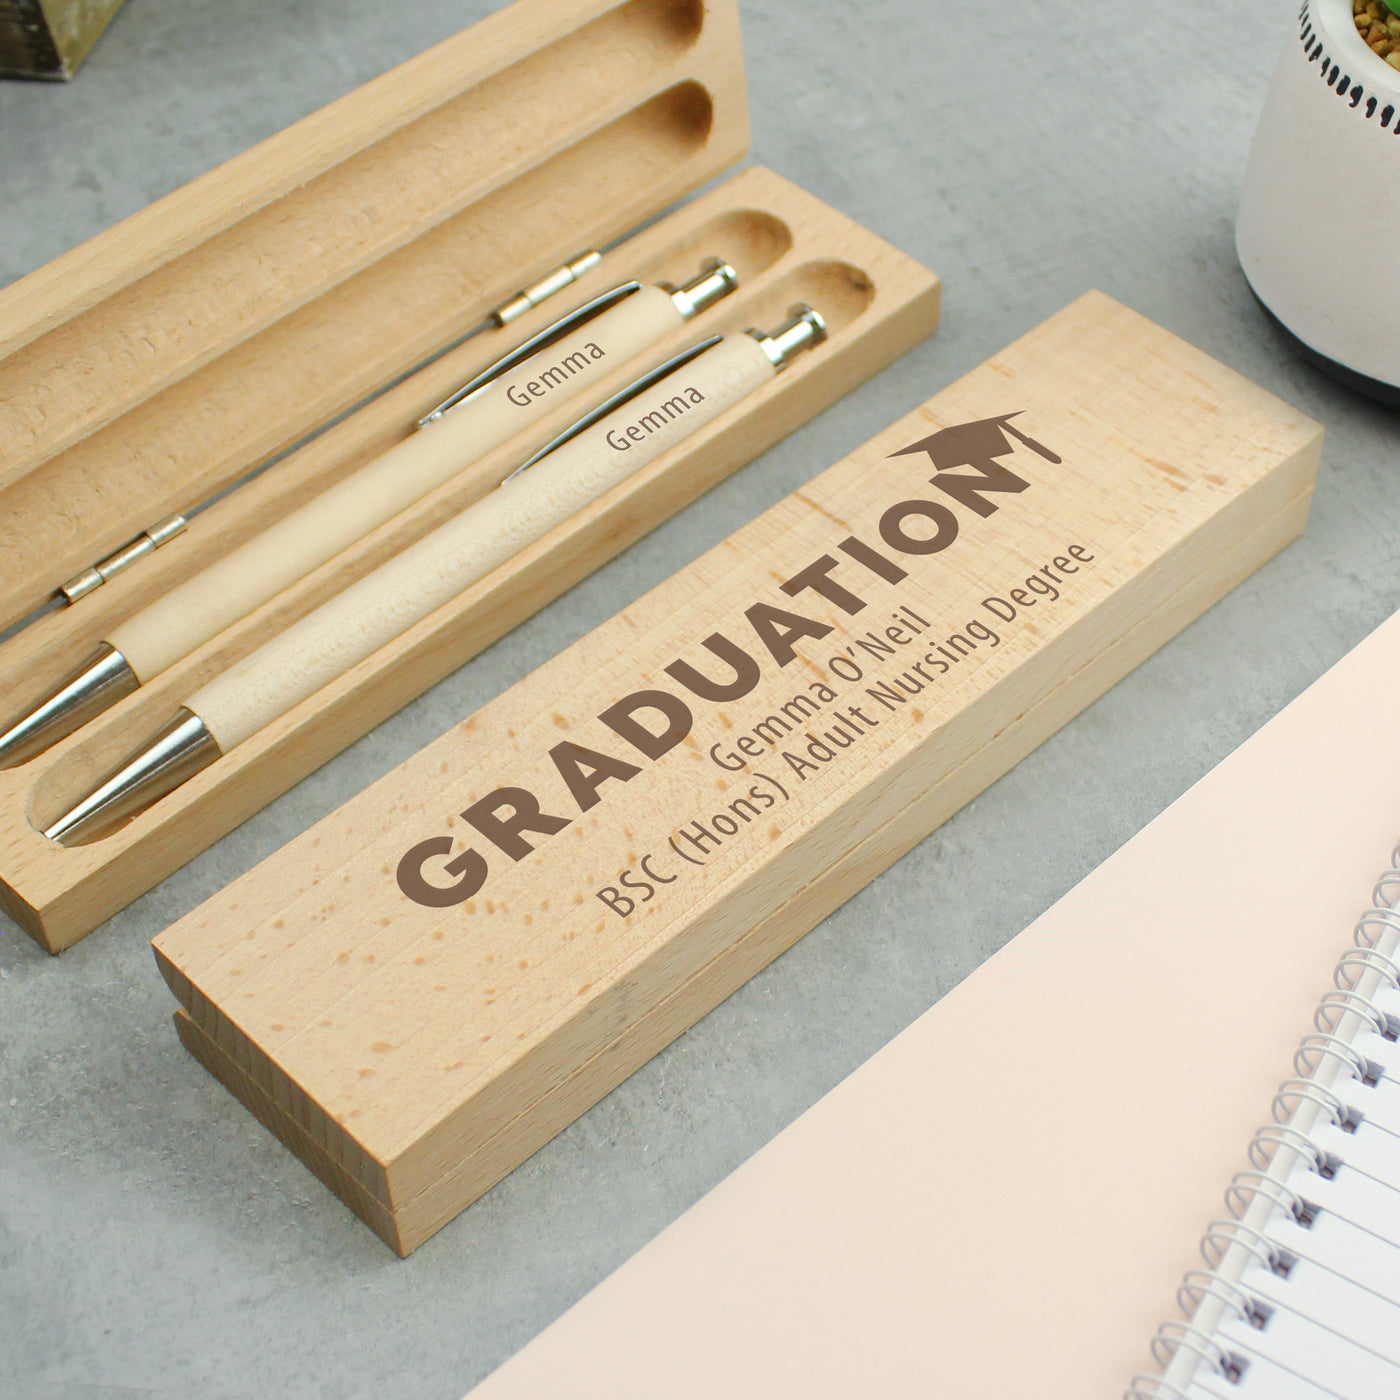 Personalised Graduation Wooden Pen and Pencil Set